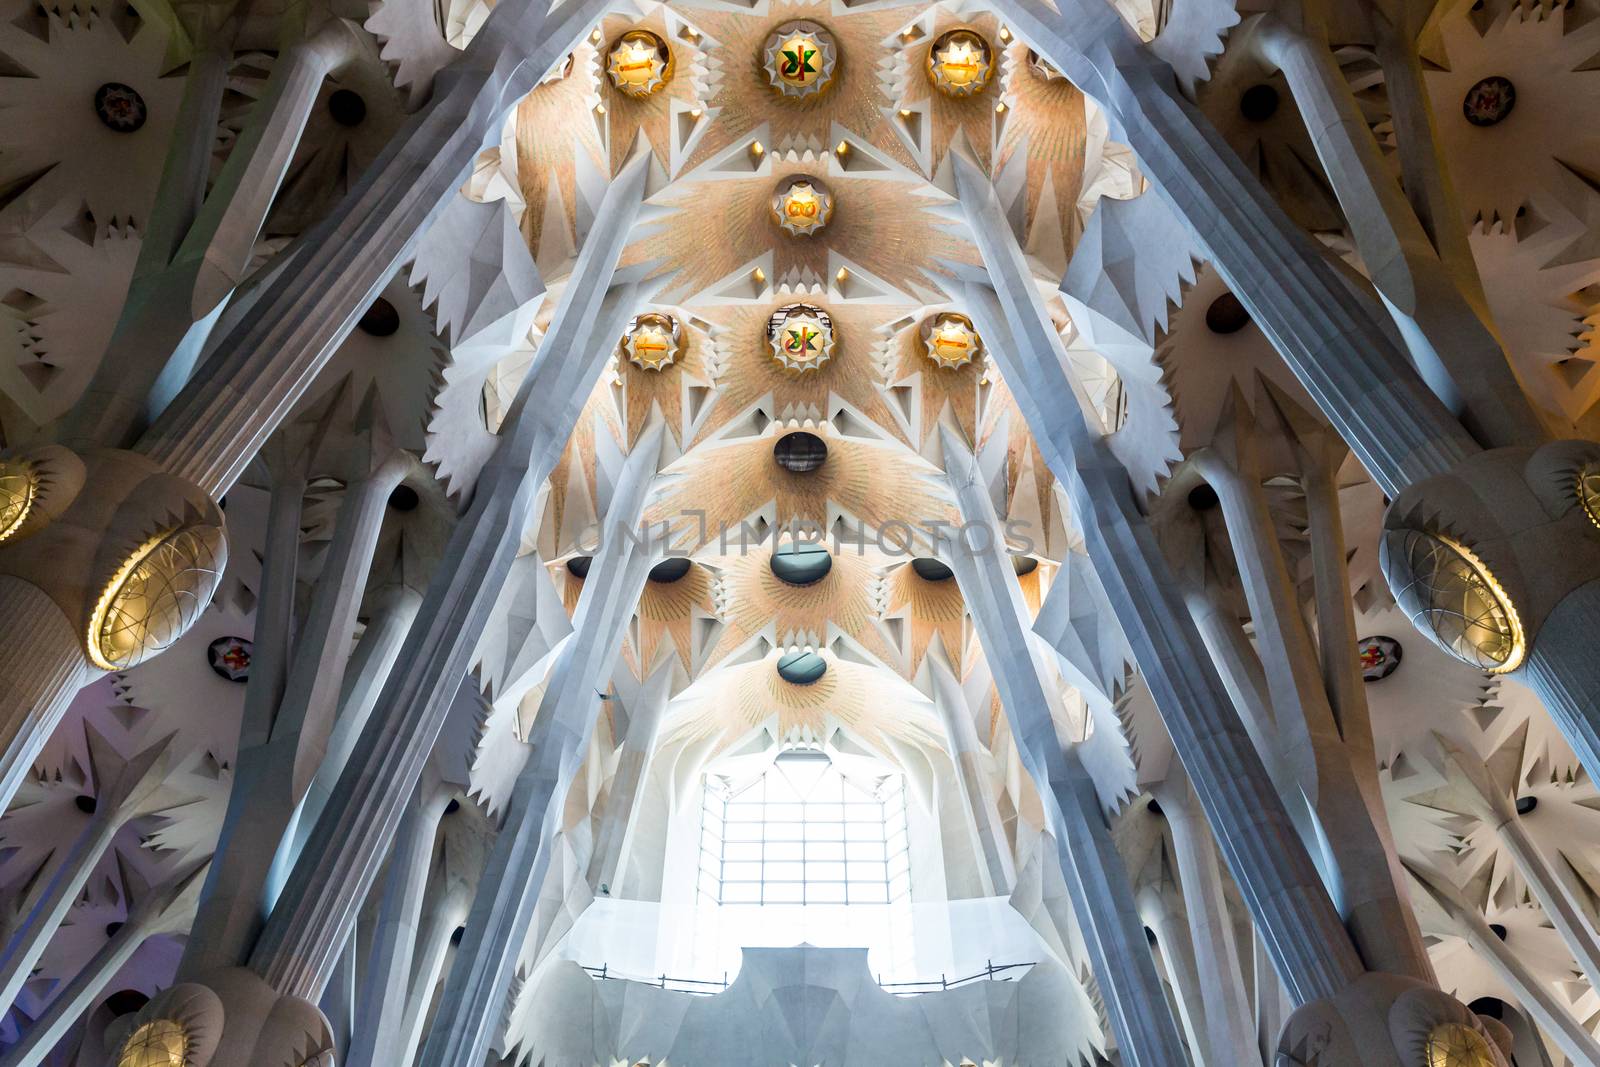 Barcelona, Spain - Jun 10:Interior of  La Sagrada Familia - designed by Gaudi, which is being build since 19 March 1882 and is not finished yet Jun 10, 2014 in Barcelona, Spain.